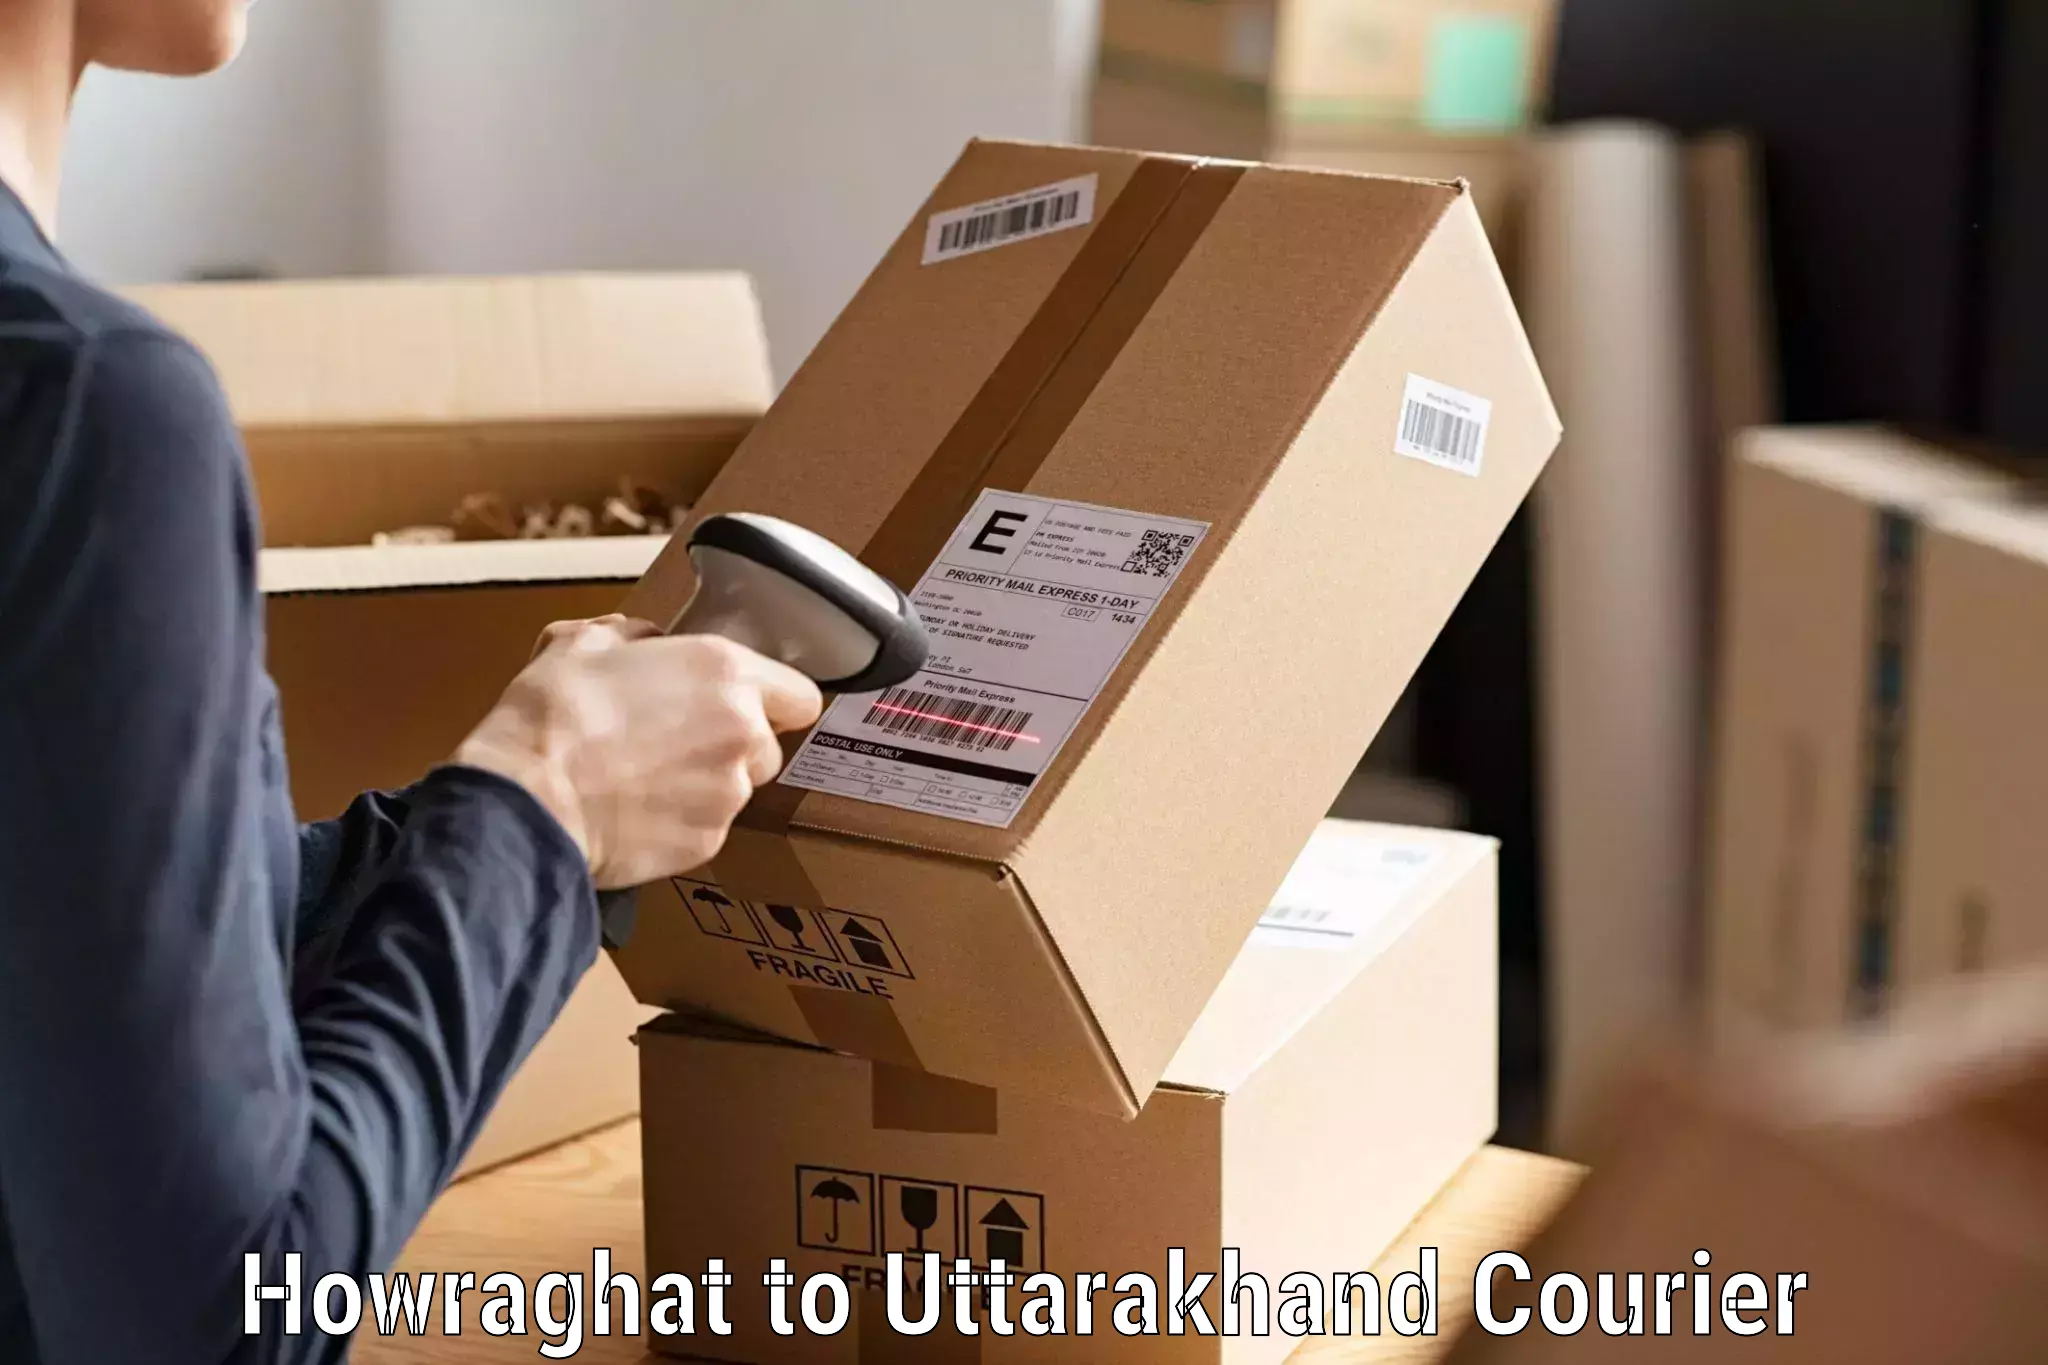 Rapid shipping services Howraghat to Pithoragarh